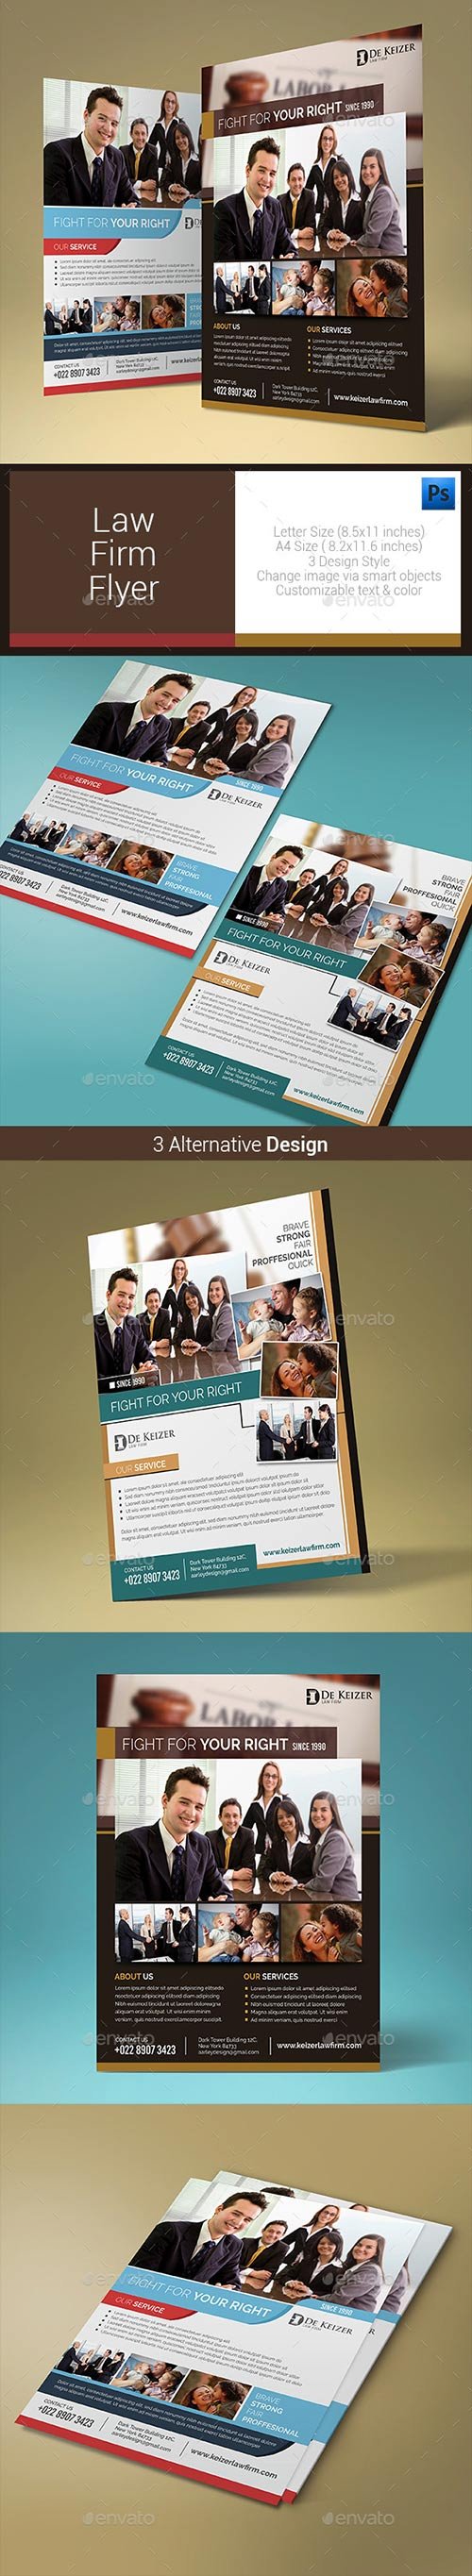 GR - Law Firm Flyer 10608631